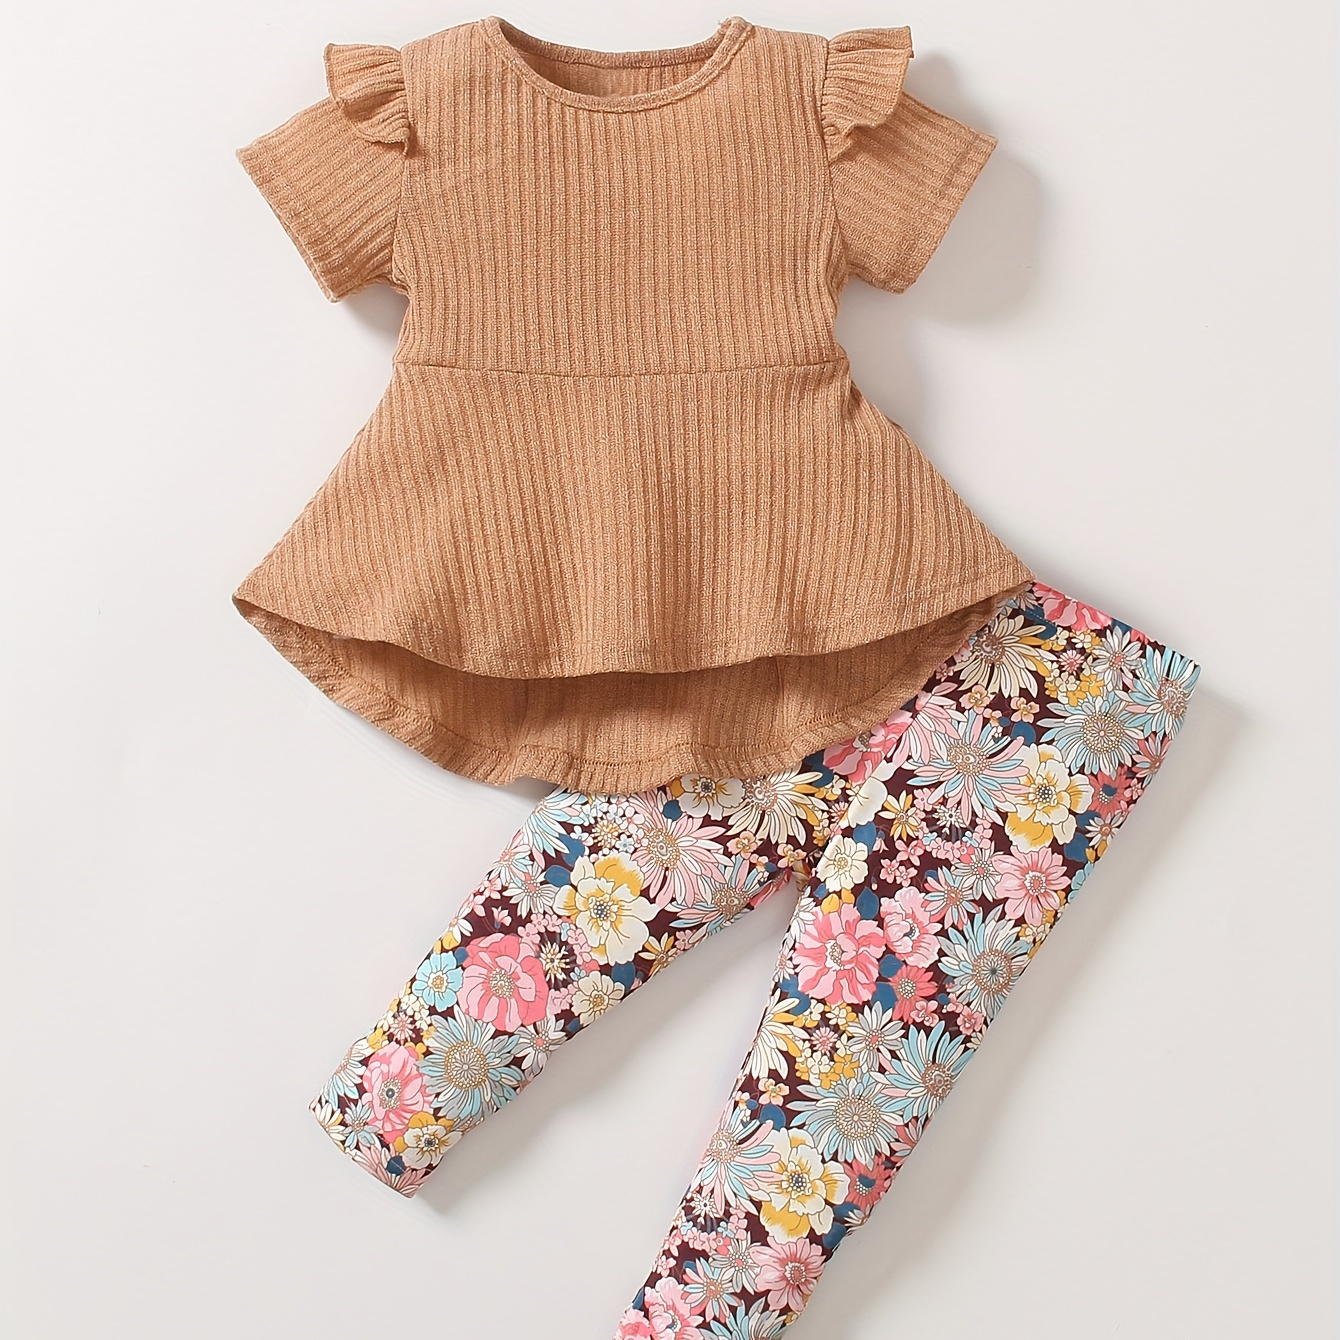 

Baby's Colorful Flower Pattern 2pcs Casual Outfit, Ribbed Short Sleeve Peplum Top & Pants Set, Toddler & Infant Girl's Clothes For Daily/holiday, As Gift